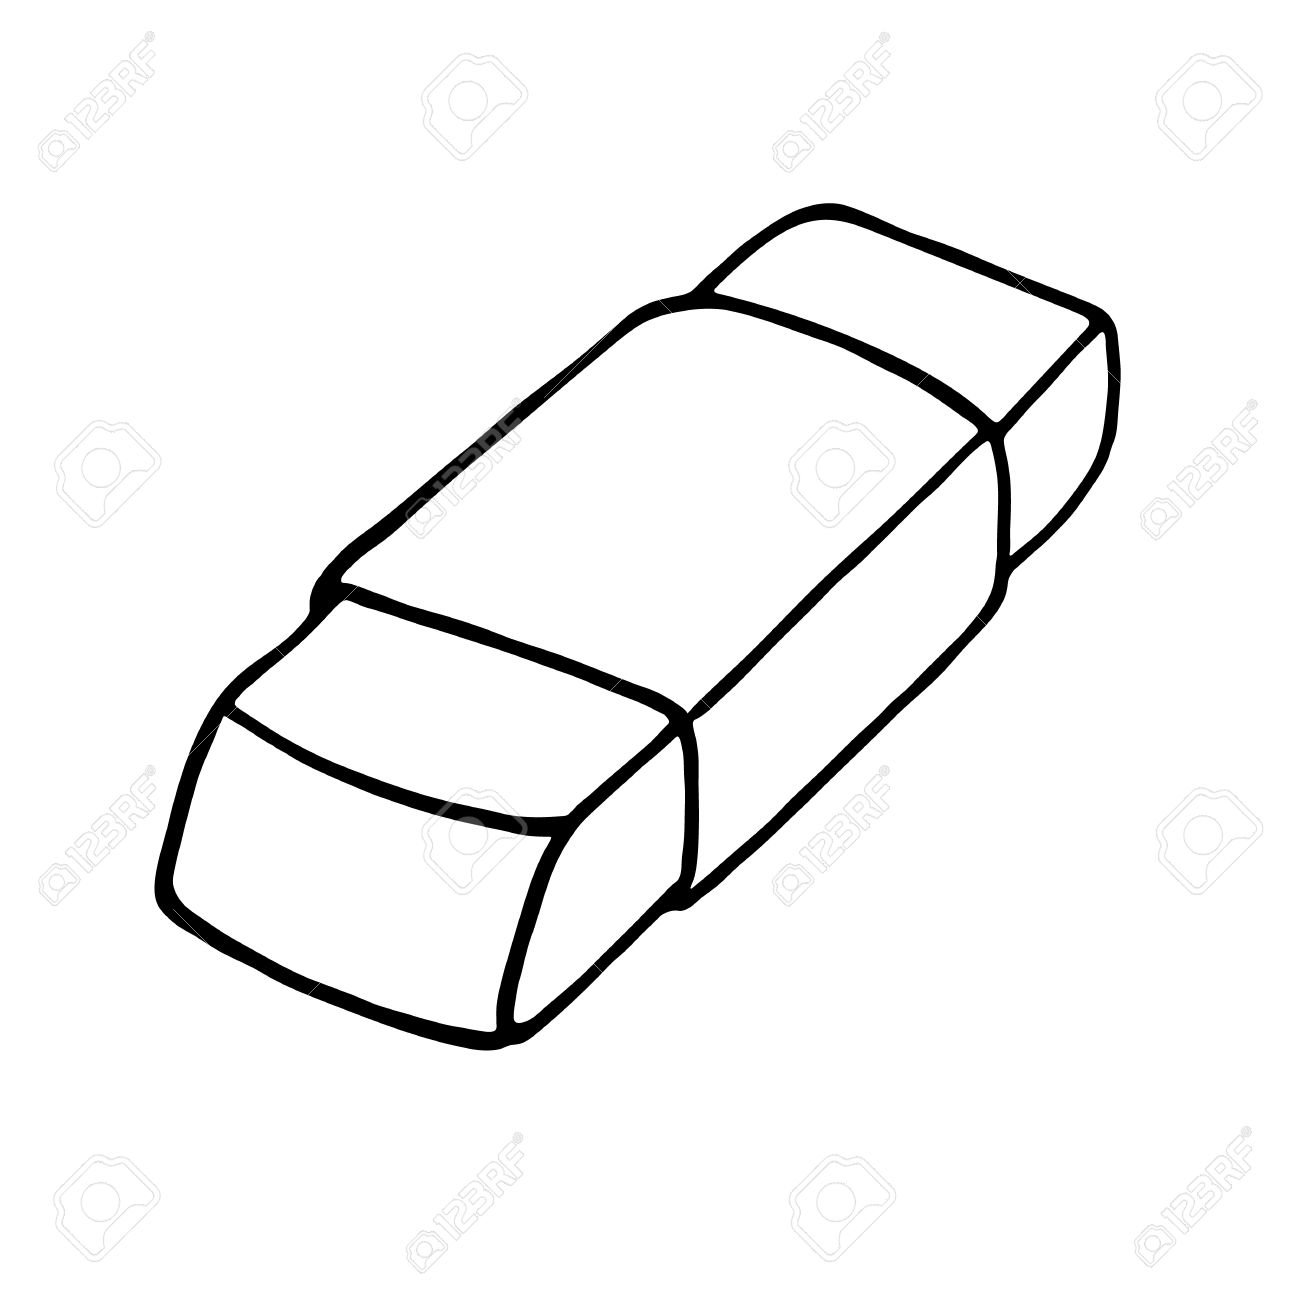 Eraser icon. Outlined » Clipart Station.